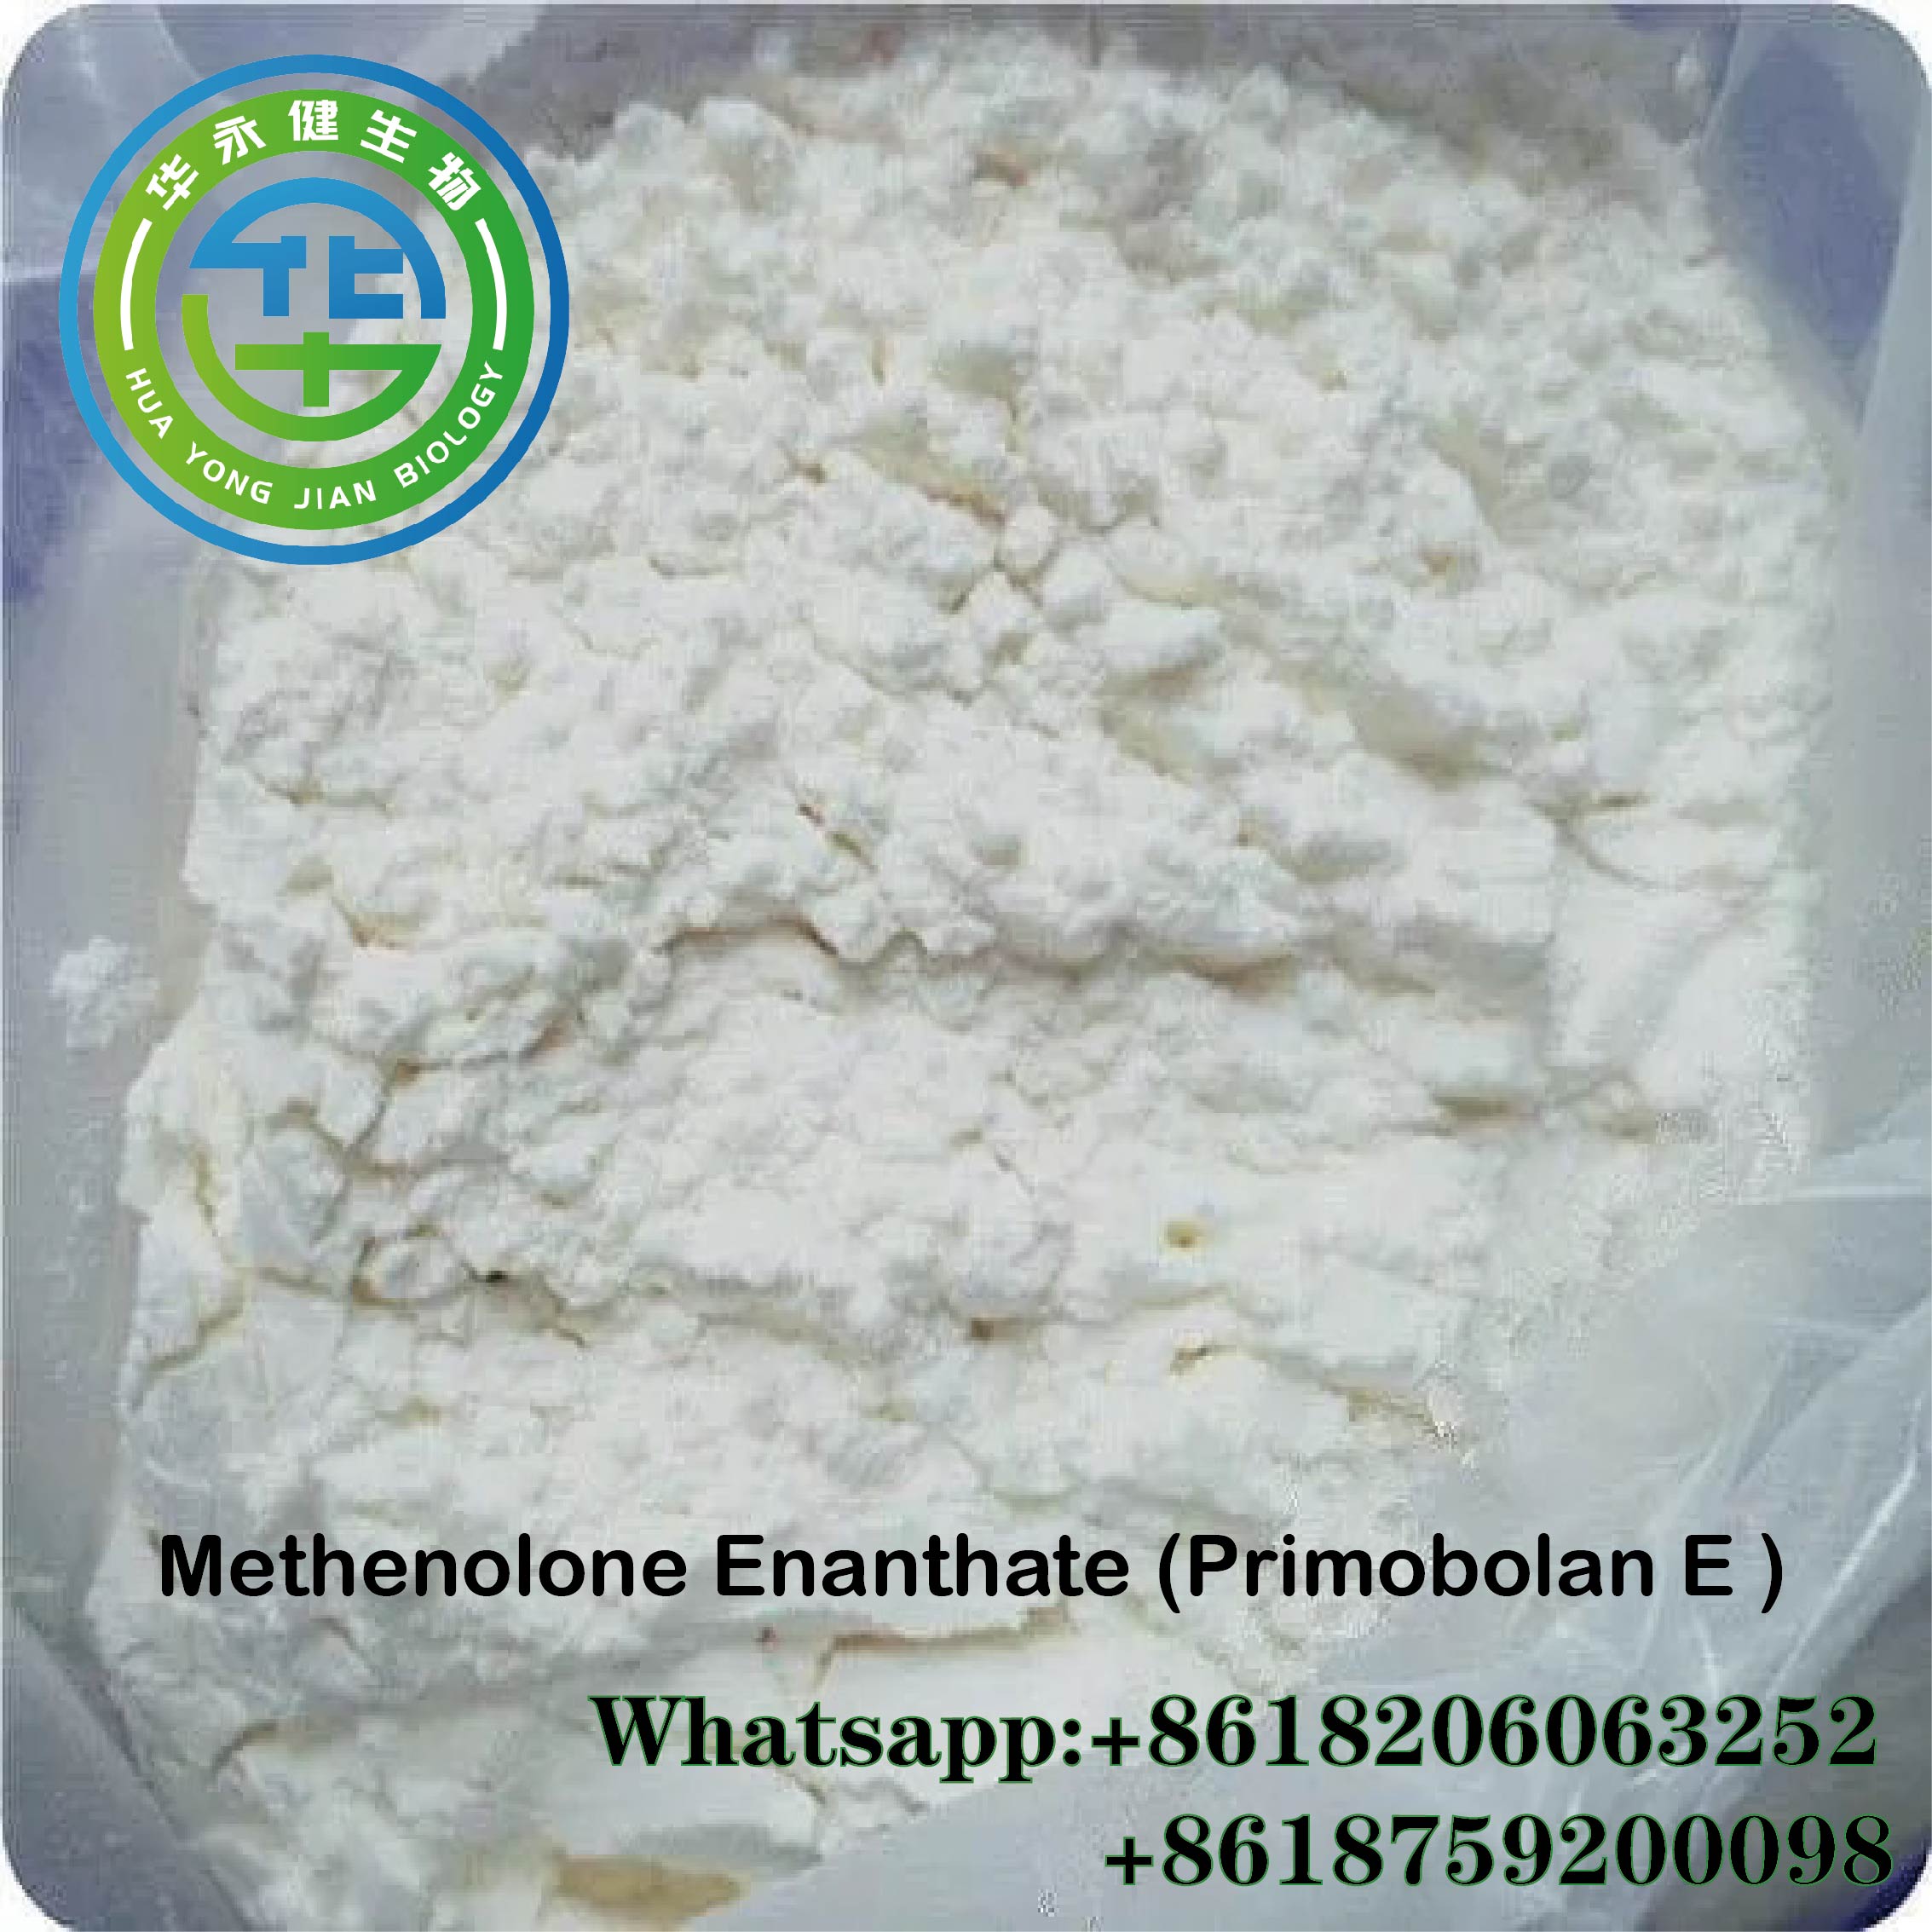 Methenolone Enanthate Muscle Gain Primobolan Steroid For Men Sexual Function without Side Effects CAS 303-42-4 